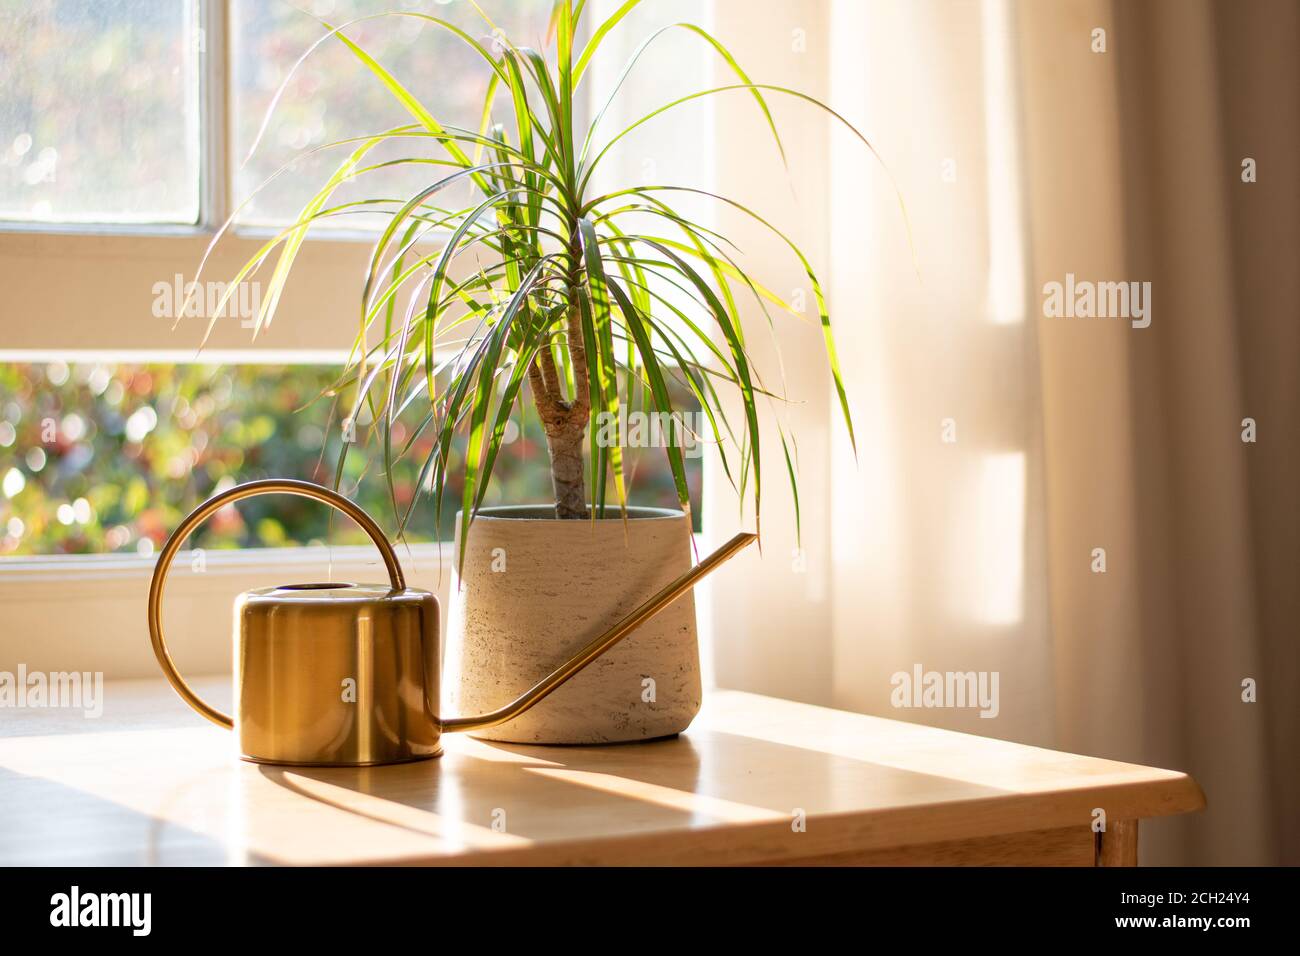 Dragon tree dracaena marginata next to a watering can in a beautifully designed home interior. Stock Photo